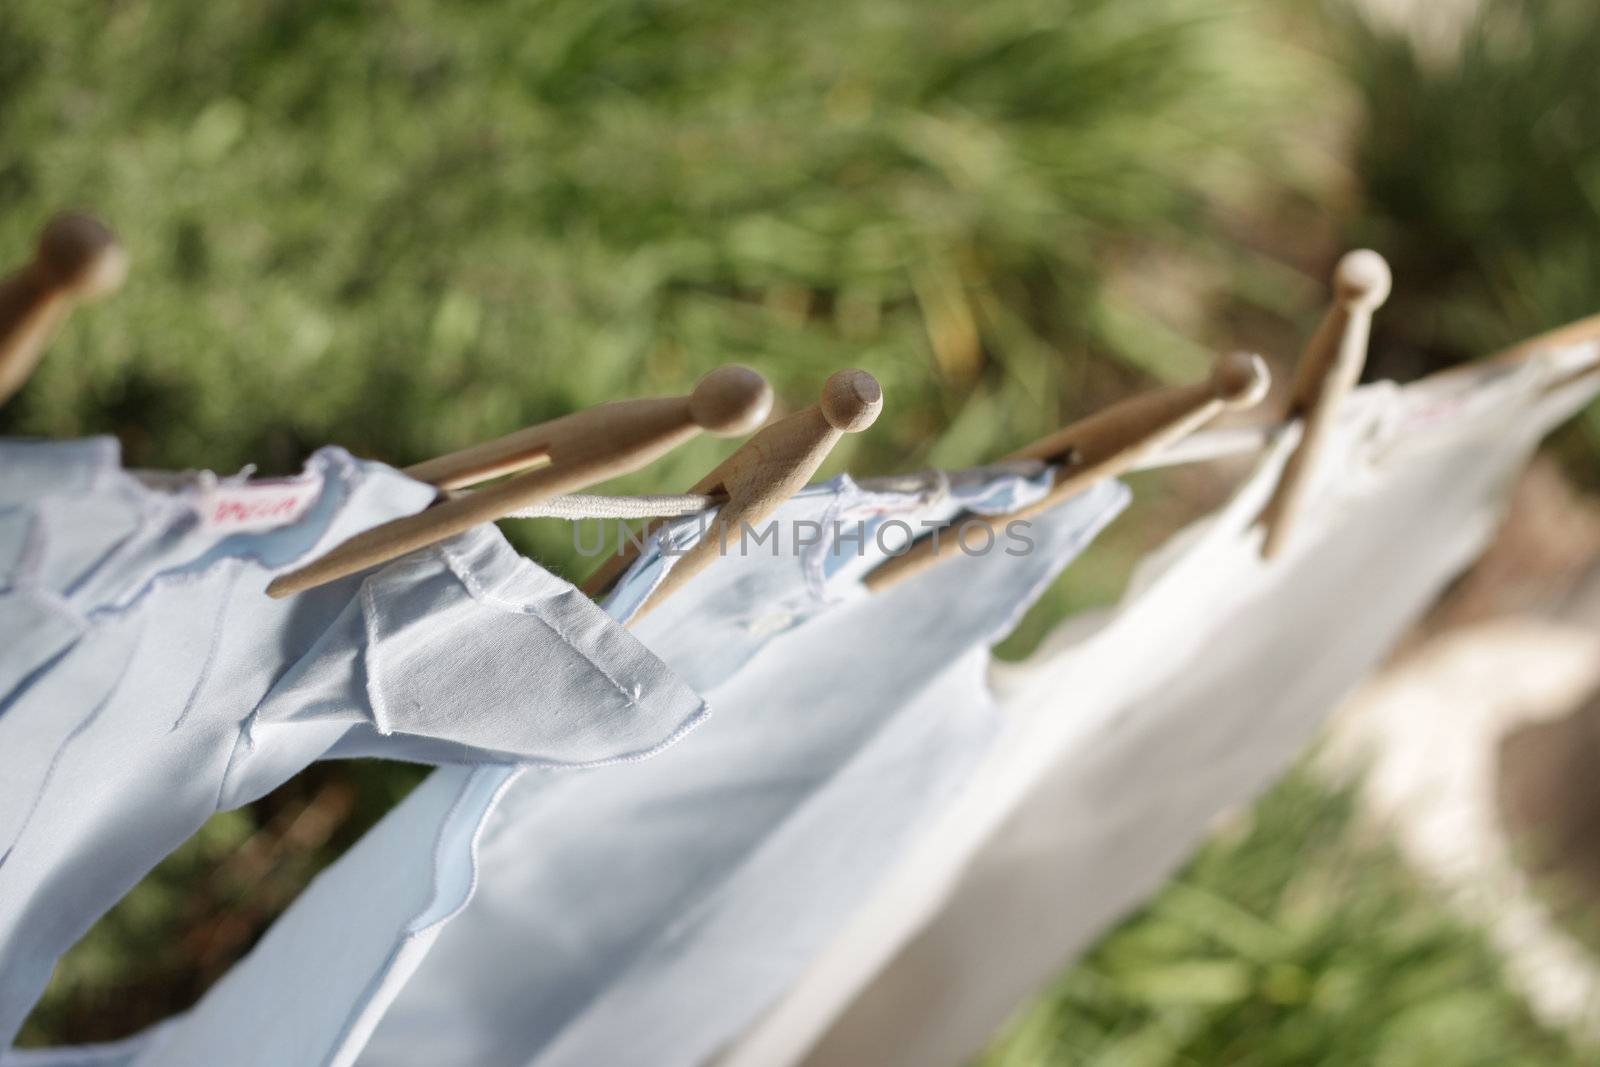 Beautiful children's clothes pegged up with old fashioned wooden pegs drying outside. Soft focus, sharpness on pegs